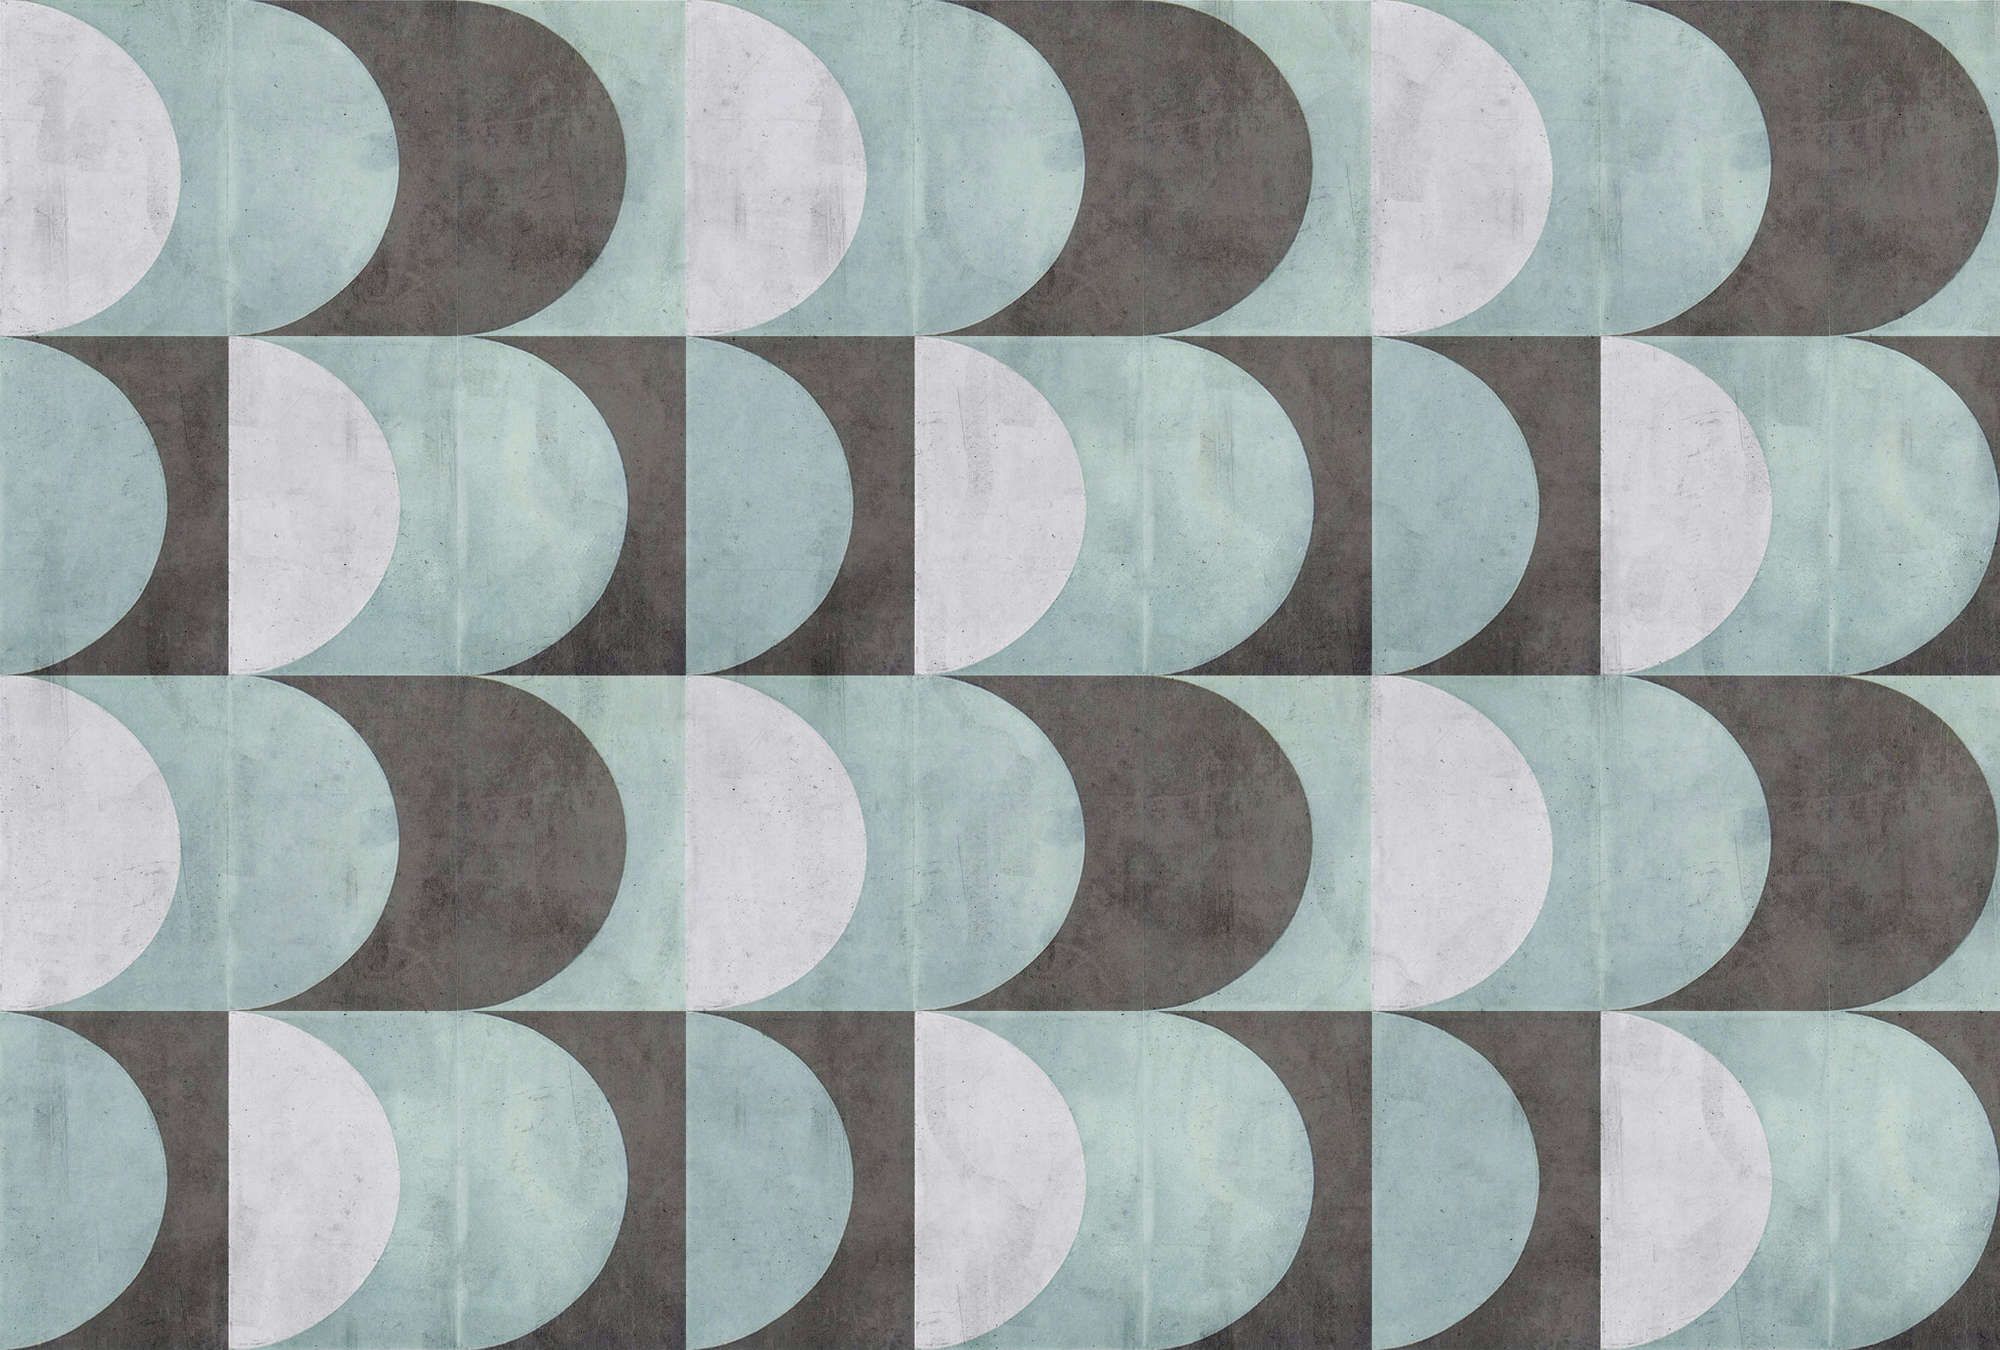             Photo wallpaper »julek 2« - retro pattern in concrete look - mint green, grey | Smooth, slightly pearly shimmering non-woven fabric
        